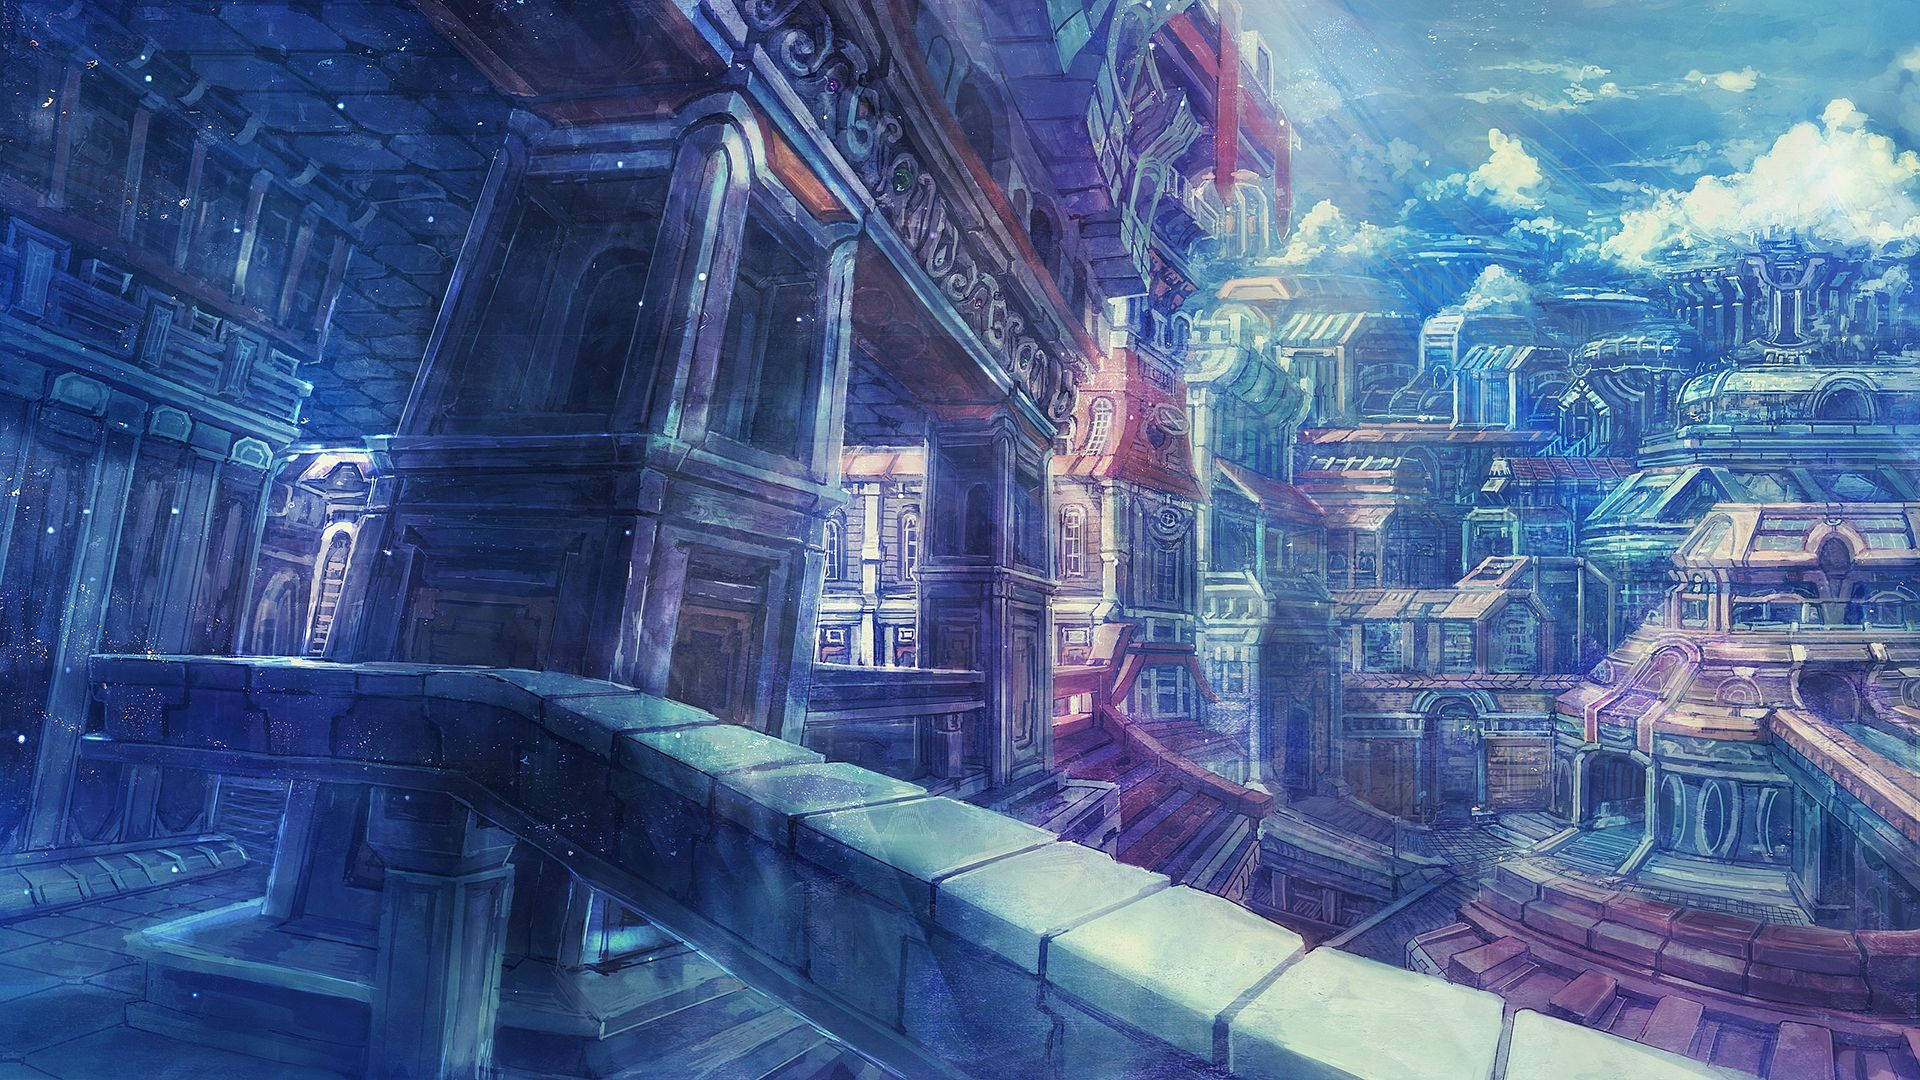 Welcome to Anime City - An Experimental, Luxury City Wallpaper